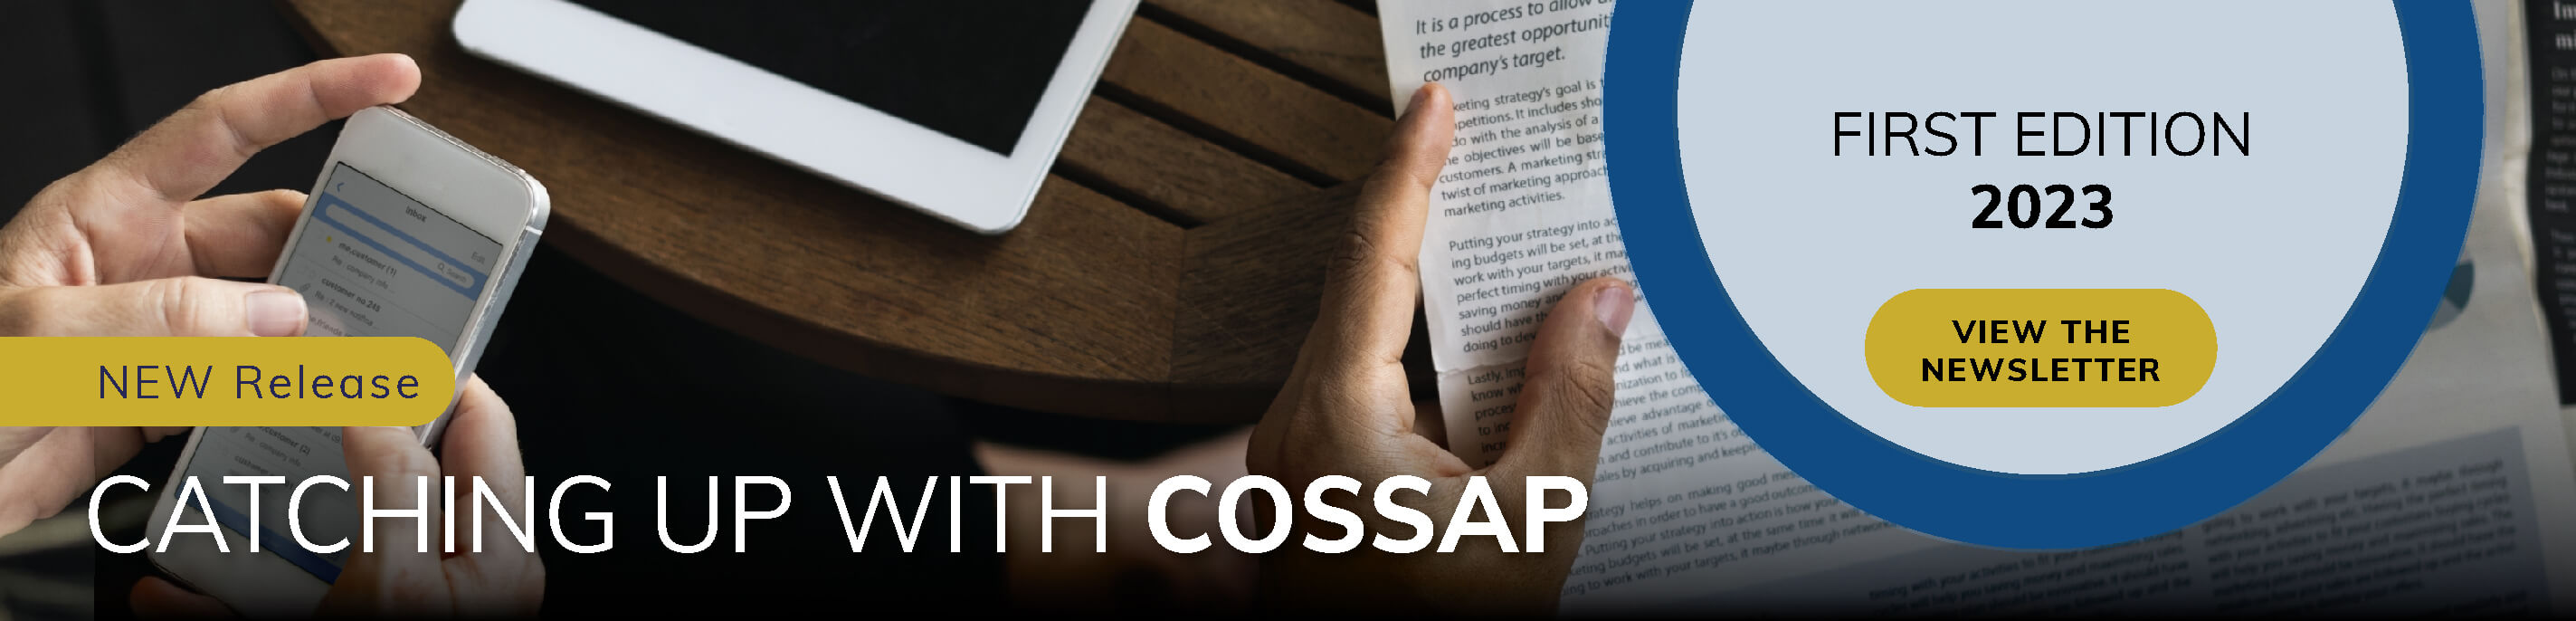 New release: Catching up with COSSAP. First editition, 2023. View the newsletter.